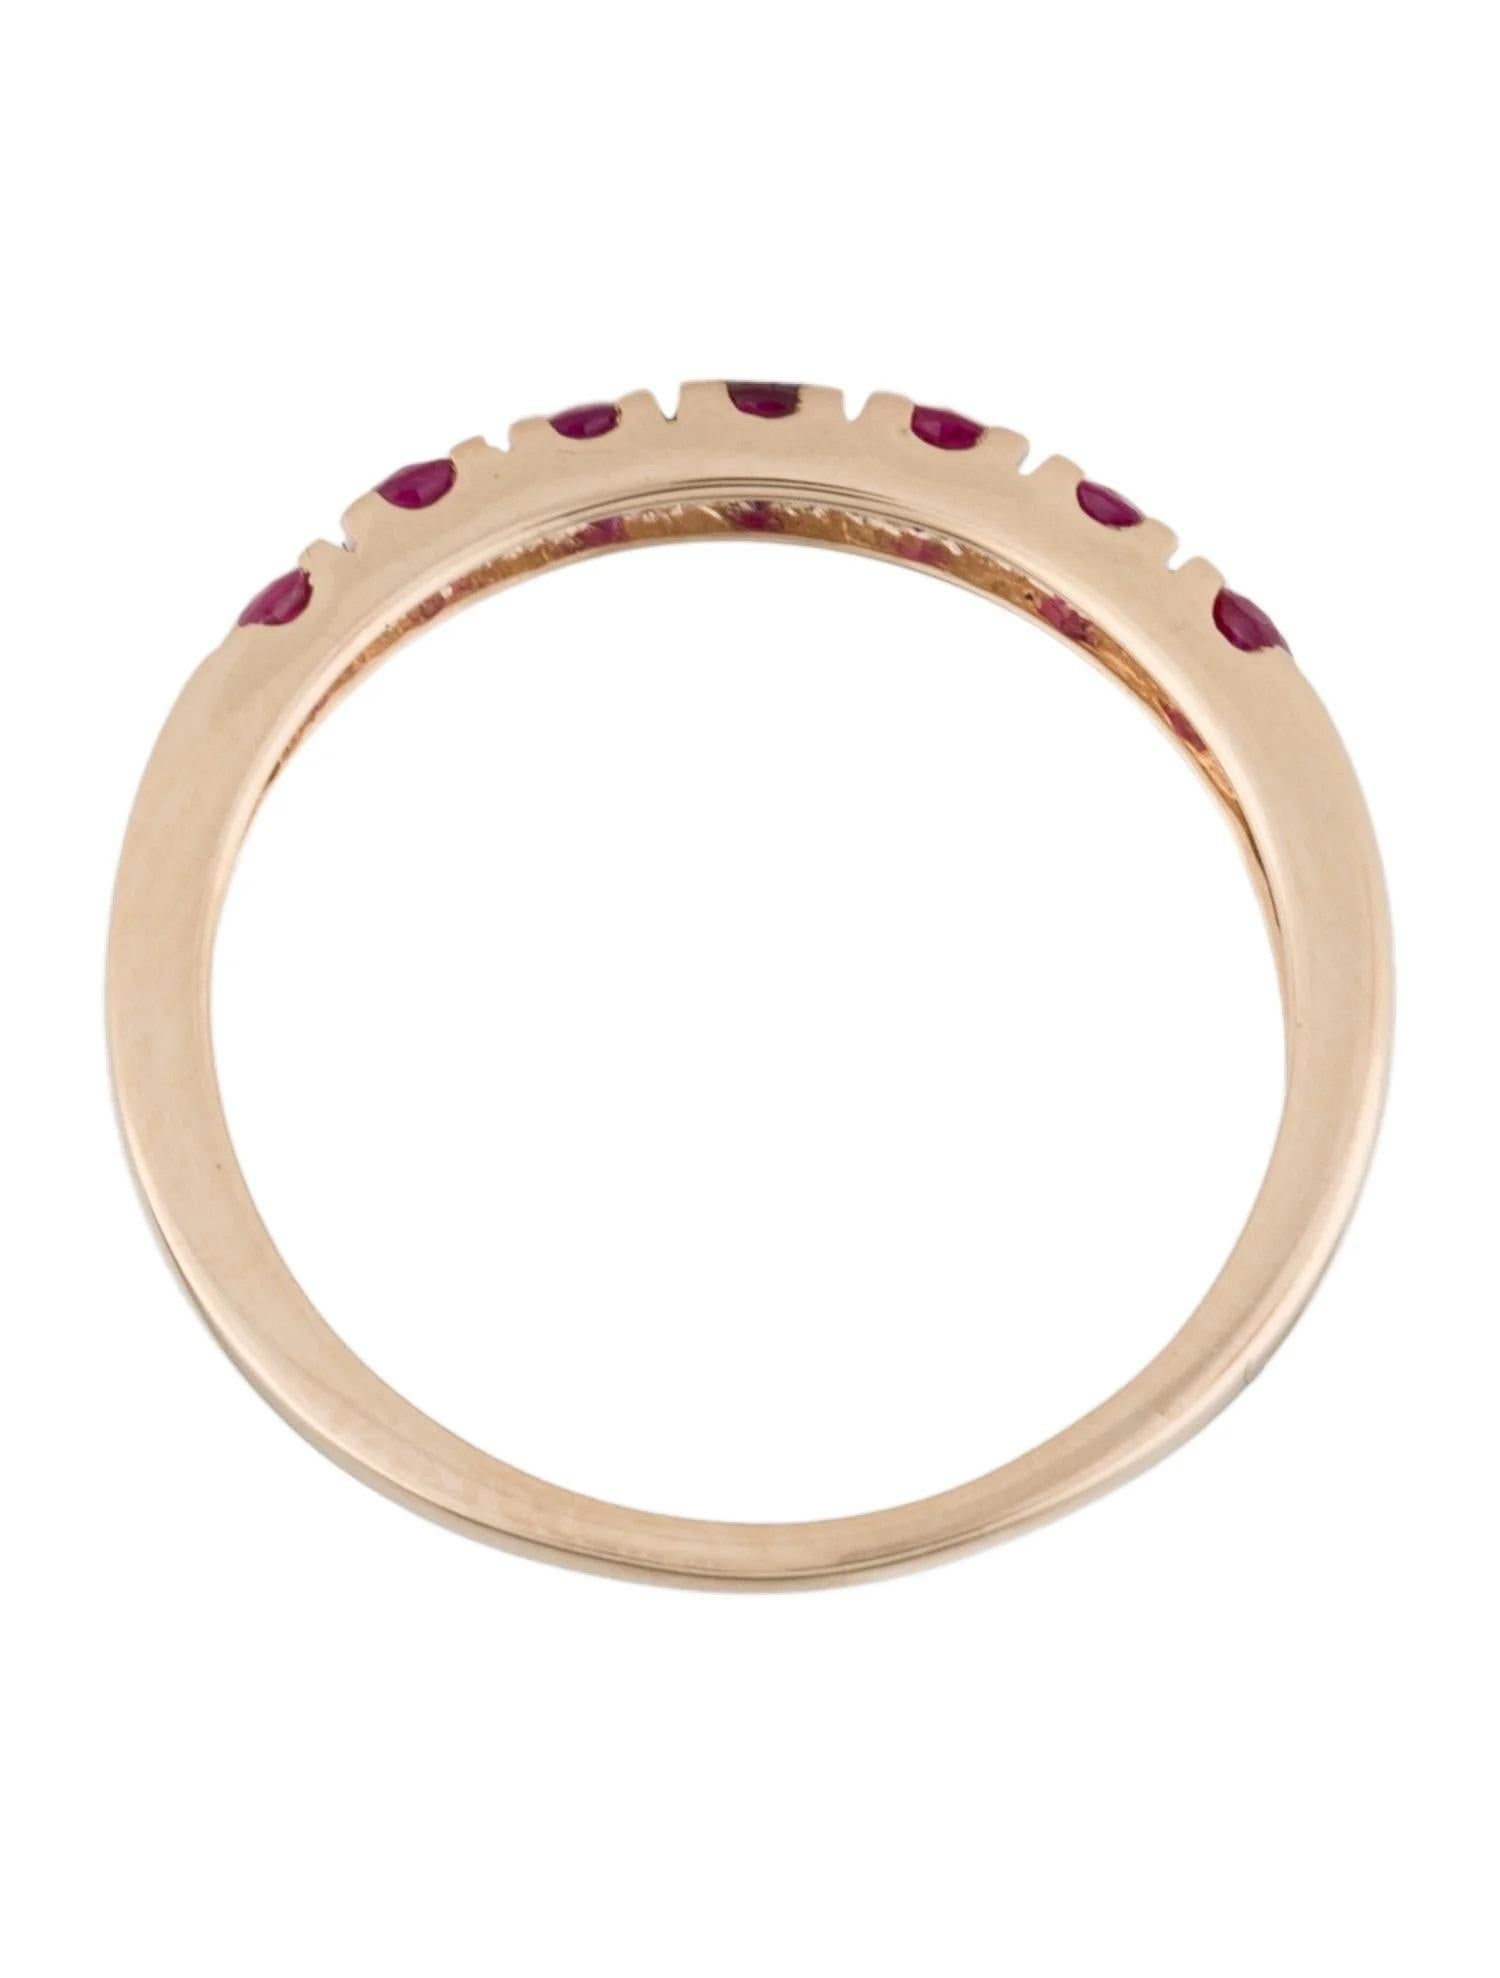 14K Ruby Thin Band Ring  0.68 Carat Round Faceted Ruby  Size 6.75 In New Condition For Sale In Holtsville, NY